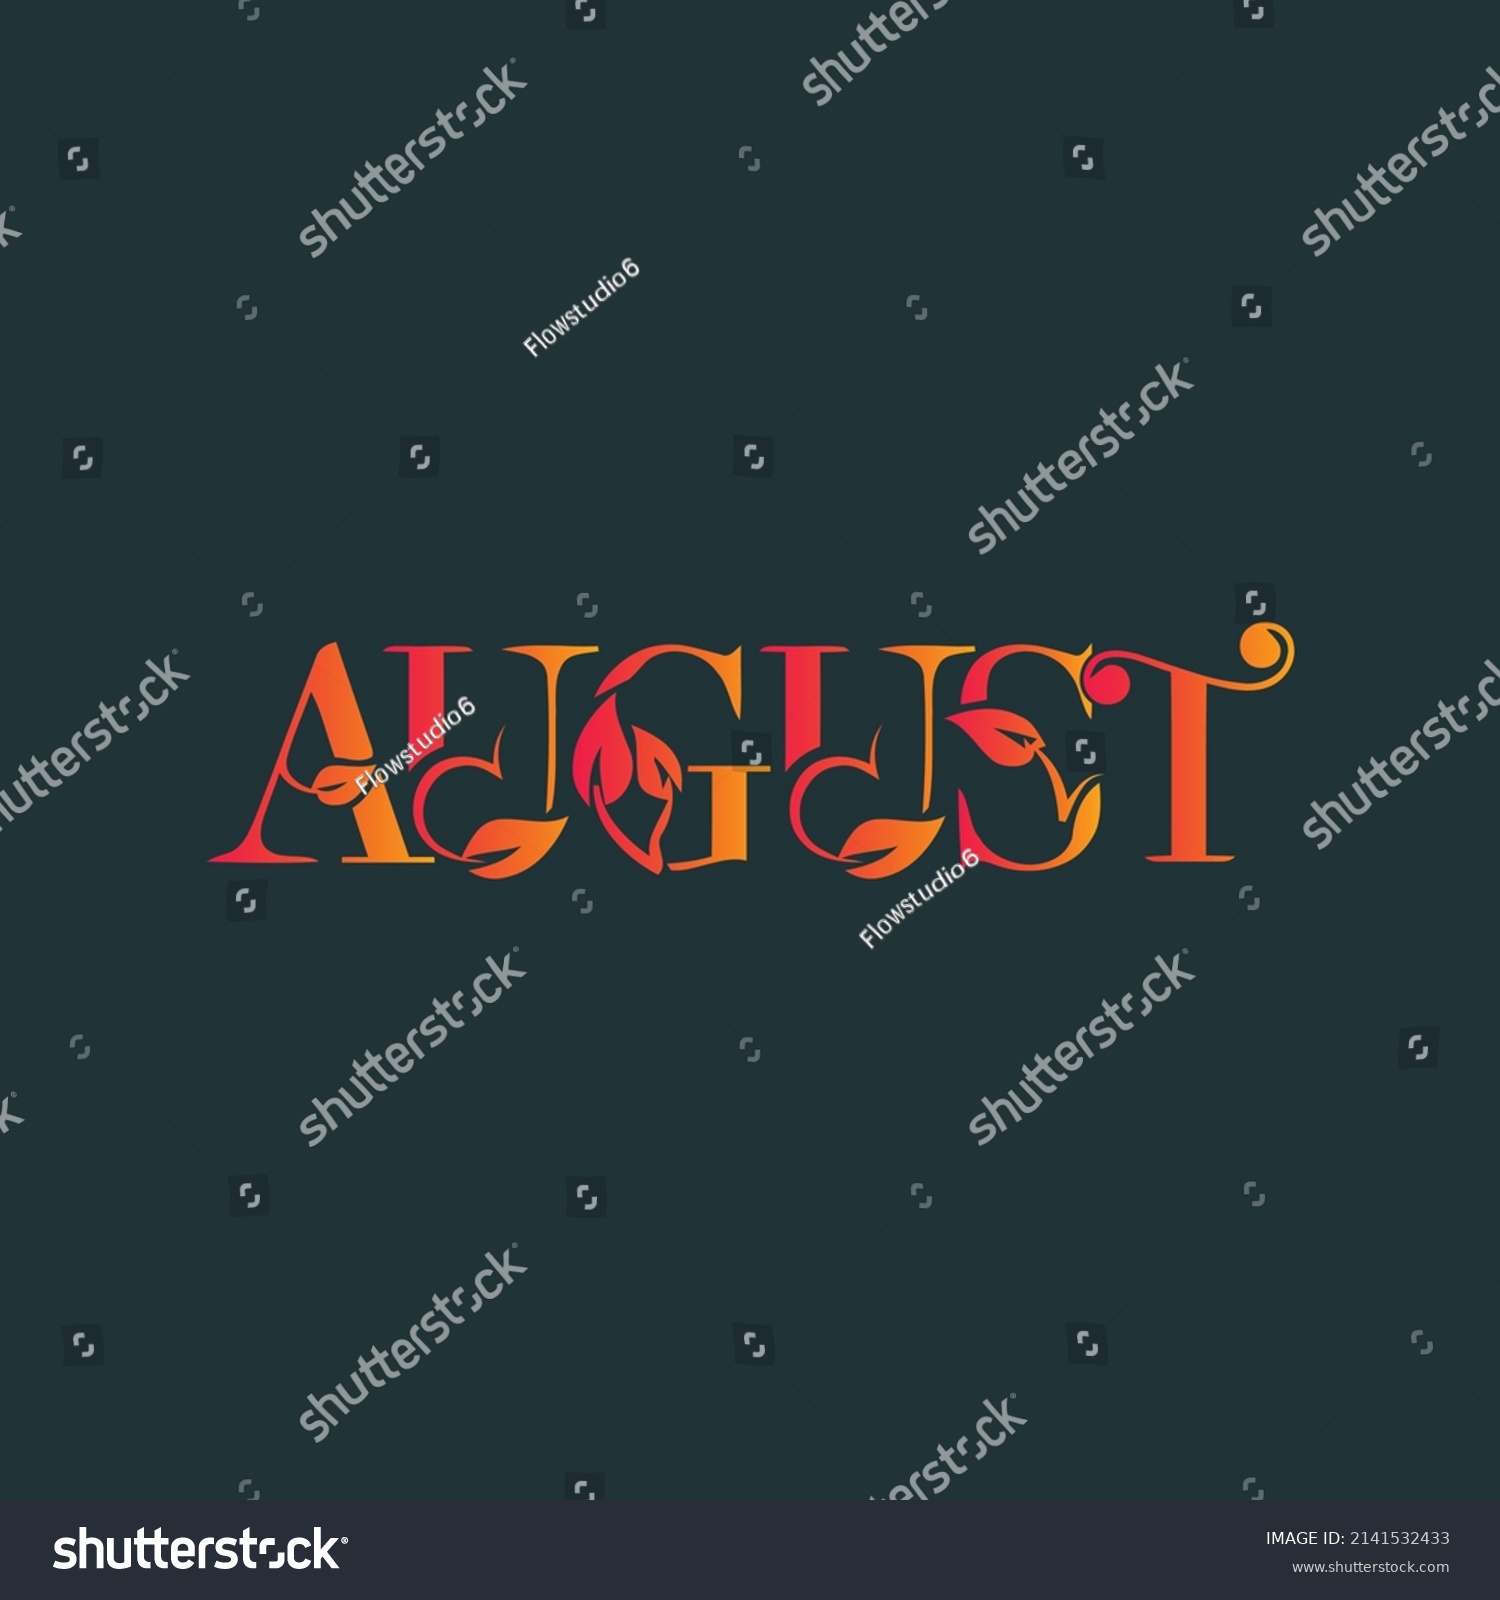 August Month Name Vector Illustration Poster Stock Vector (Royalty Free ...